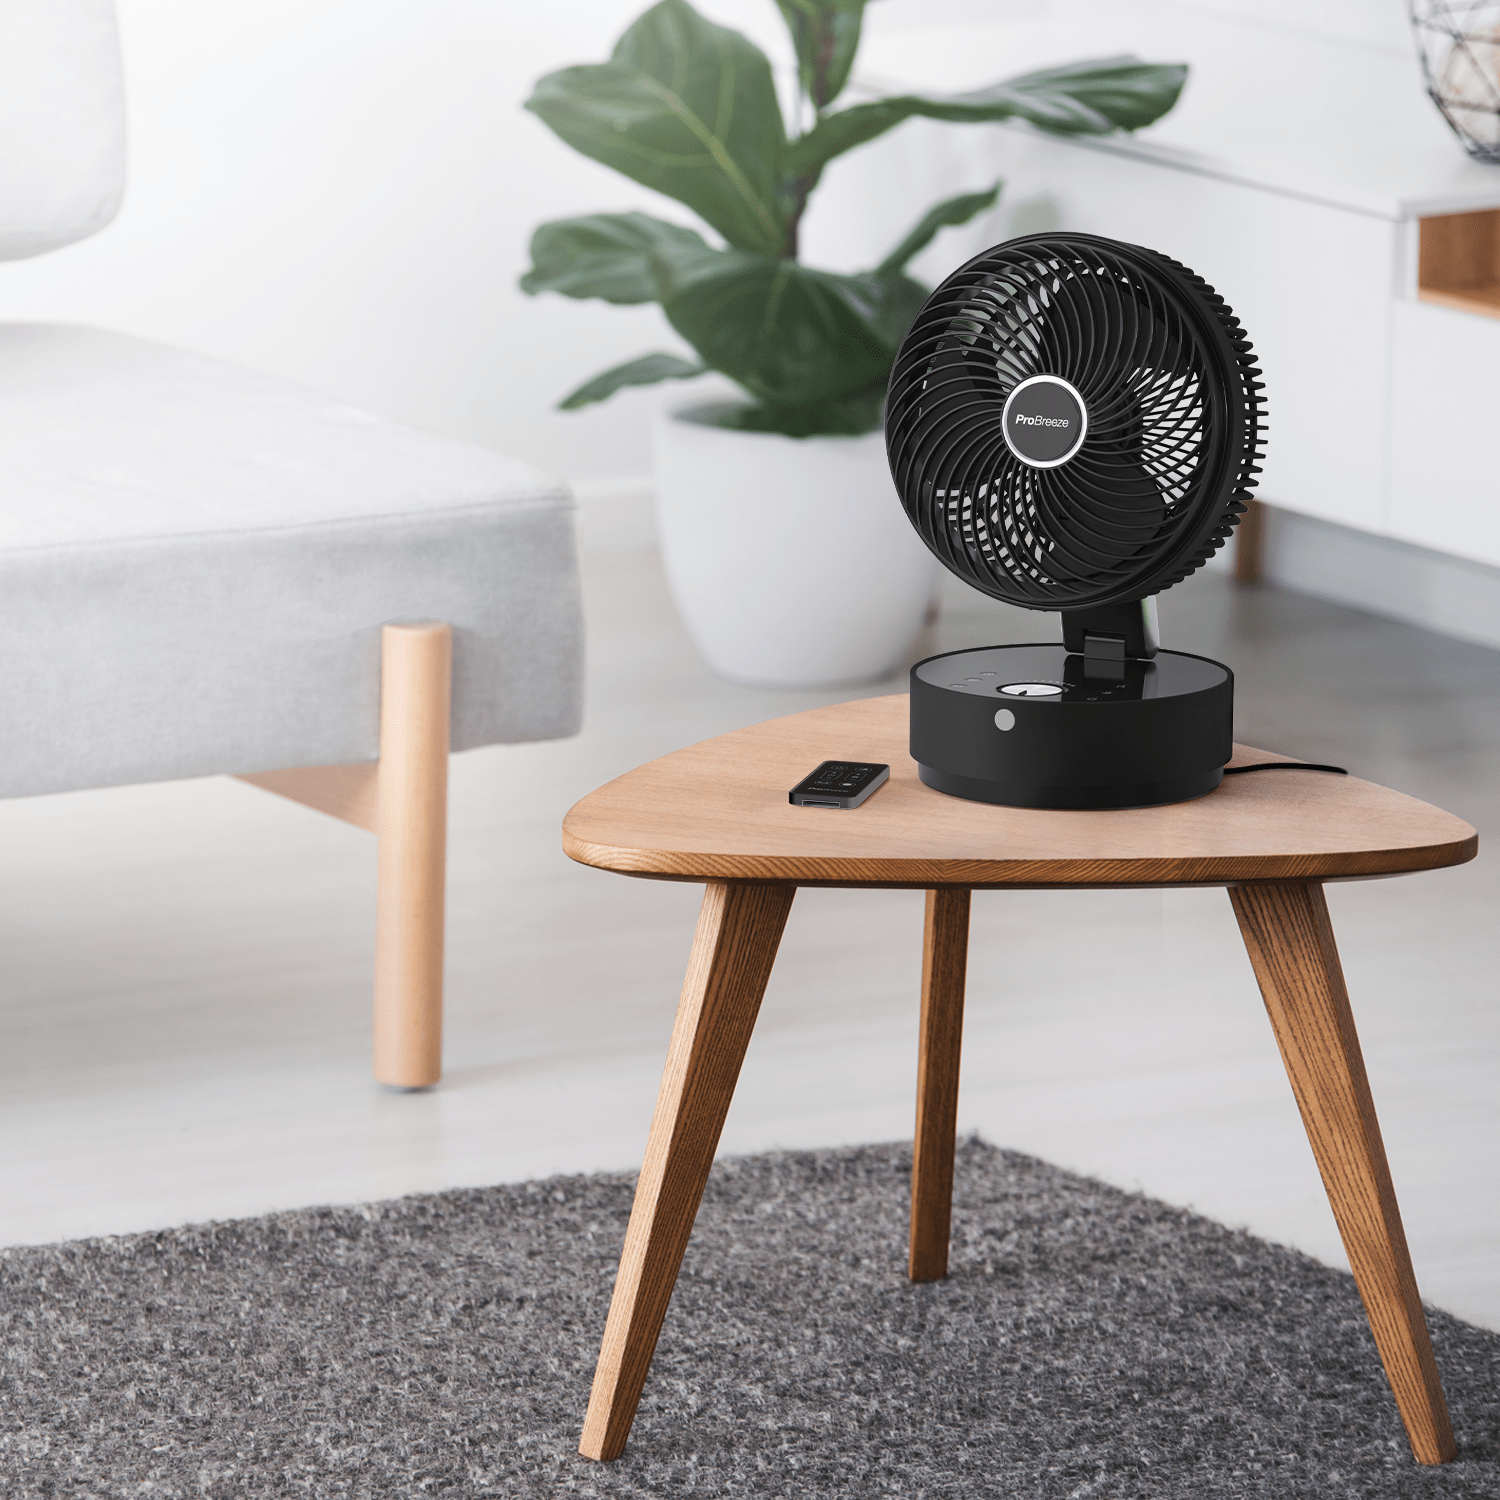 8" Turbo Desk Fan with 24 Speeds, 4 Operating Modes and 12 Hour Timer - Black